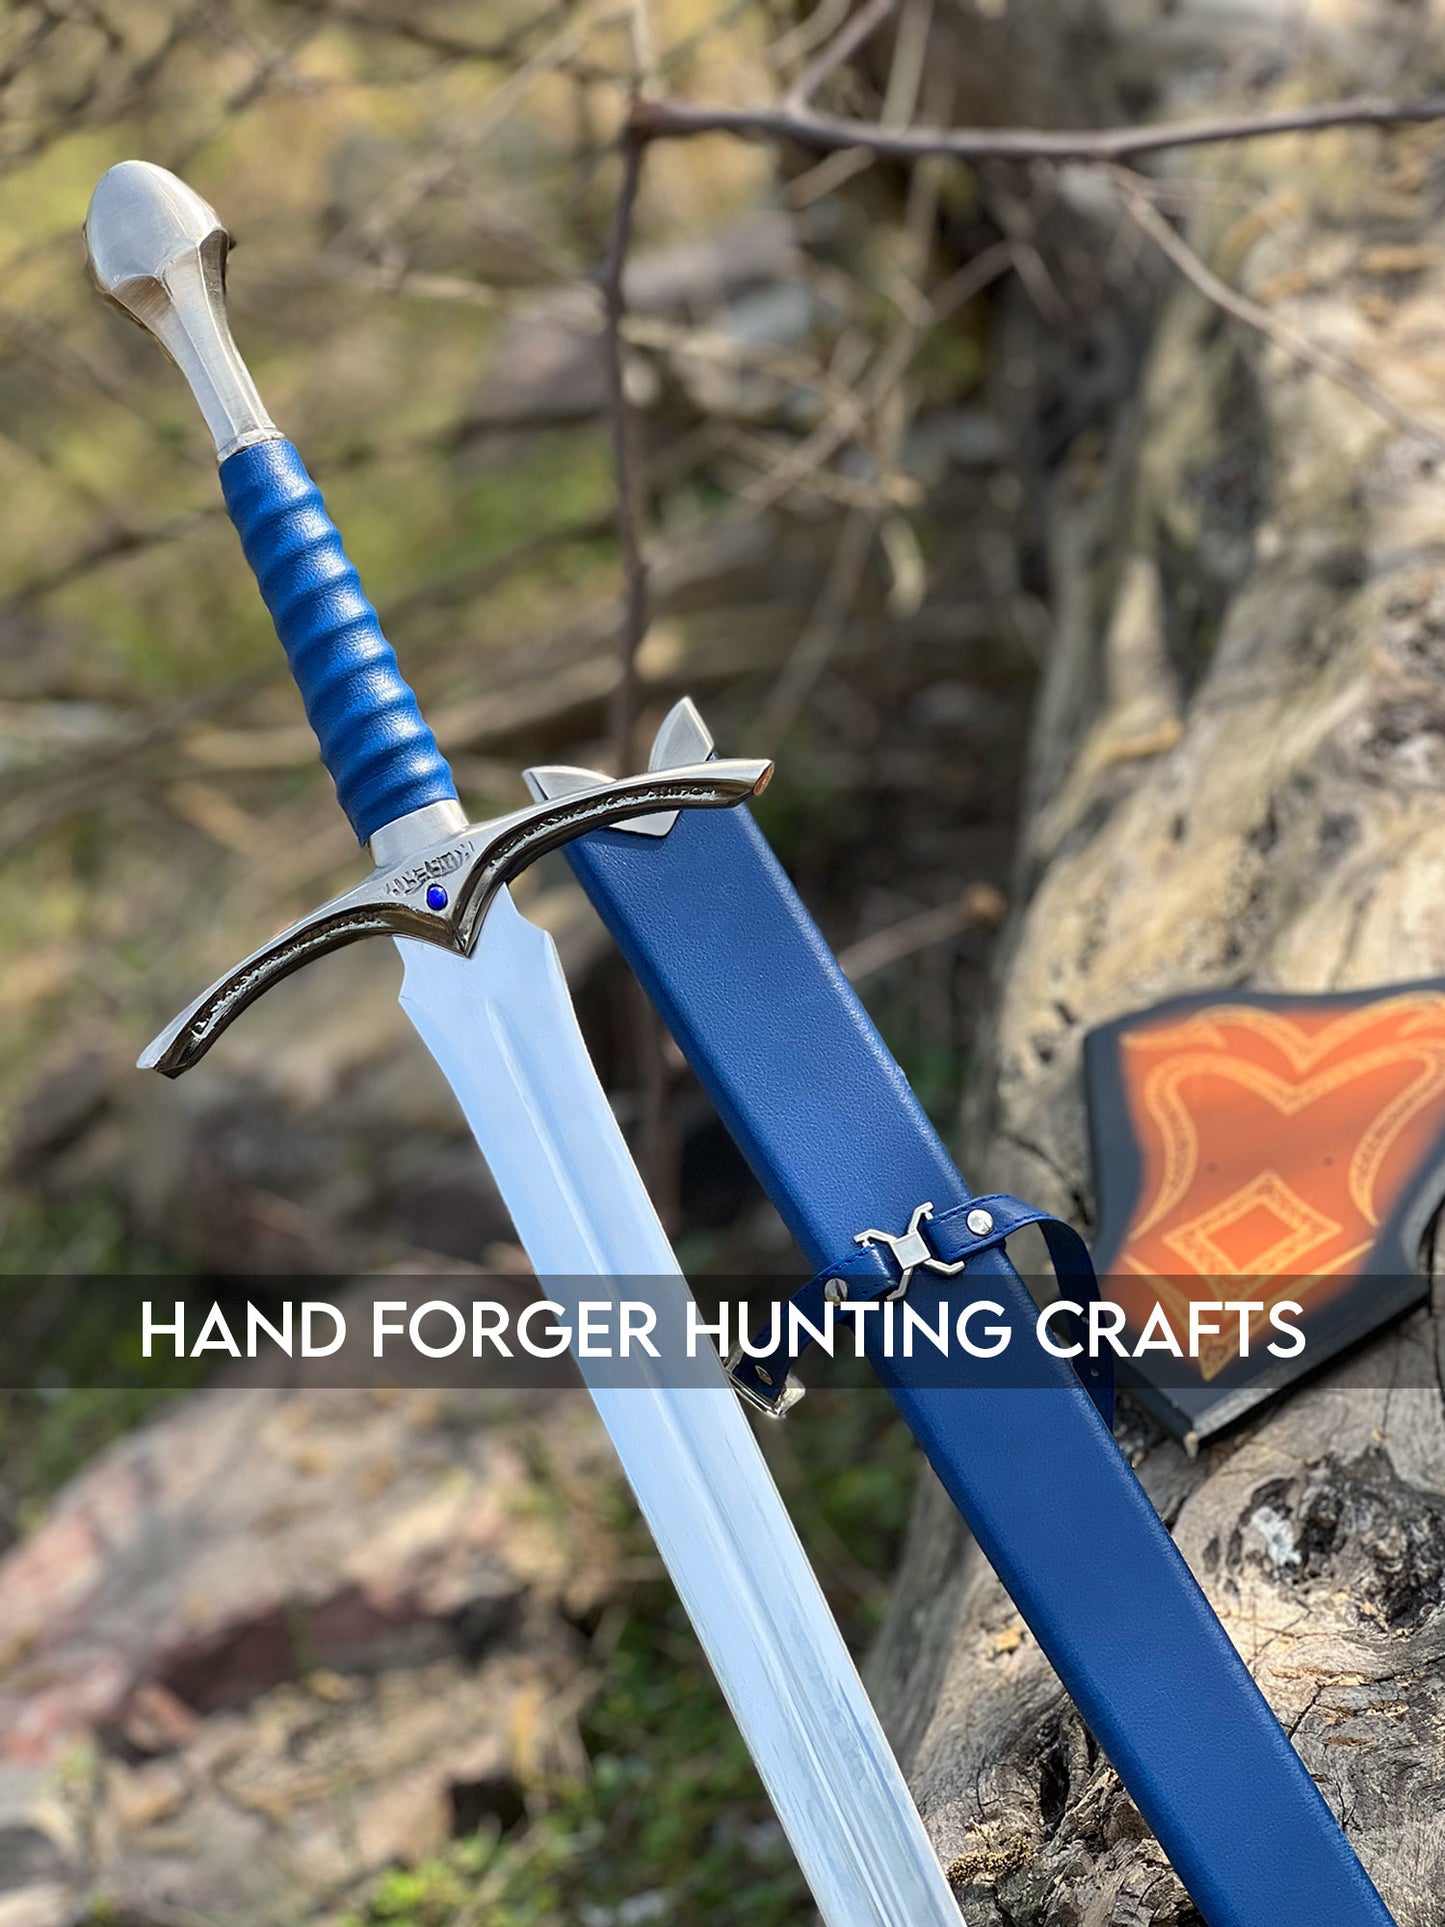 Replica of Blue Gandalf's sword from The Hobbit, perfect for display. Hand Forger Hunting Crafts 42-inch blade